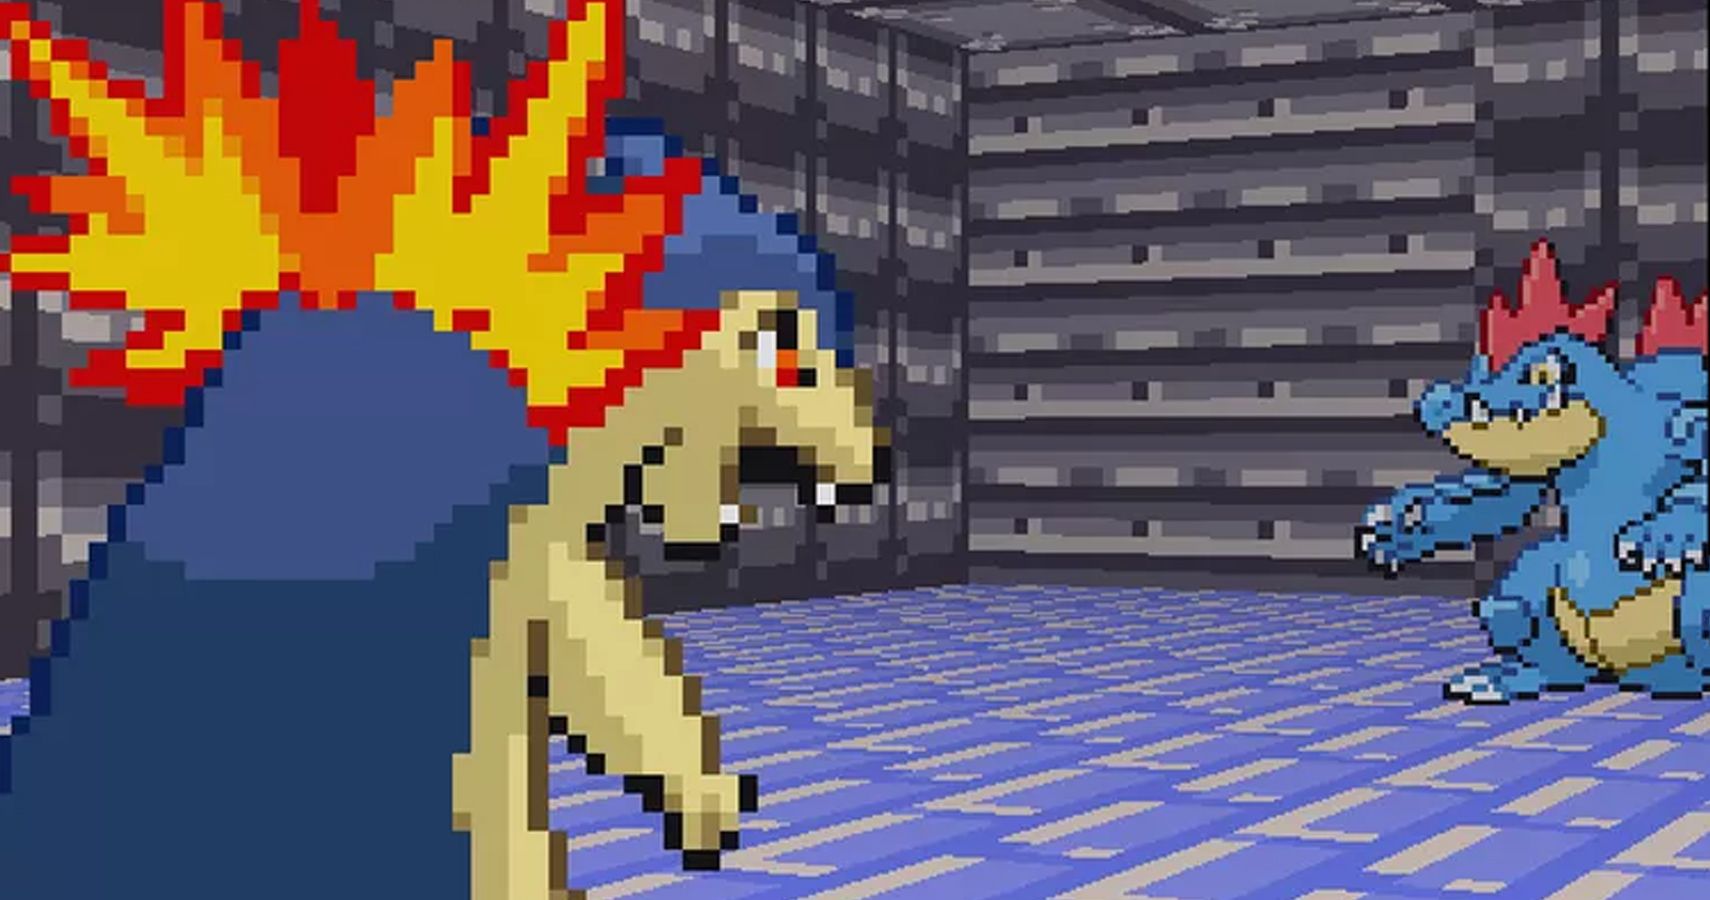 30 Hidden Details In Pokémon Gold And Silver Real Fans Completely Missed